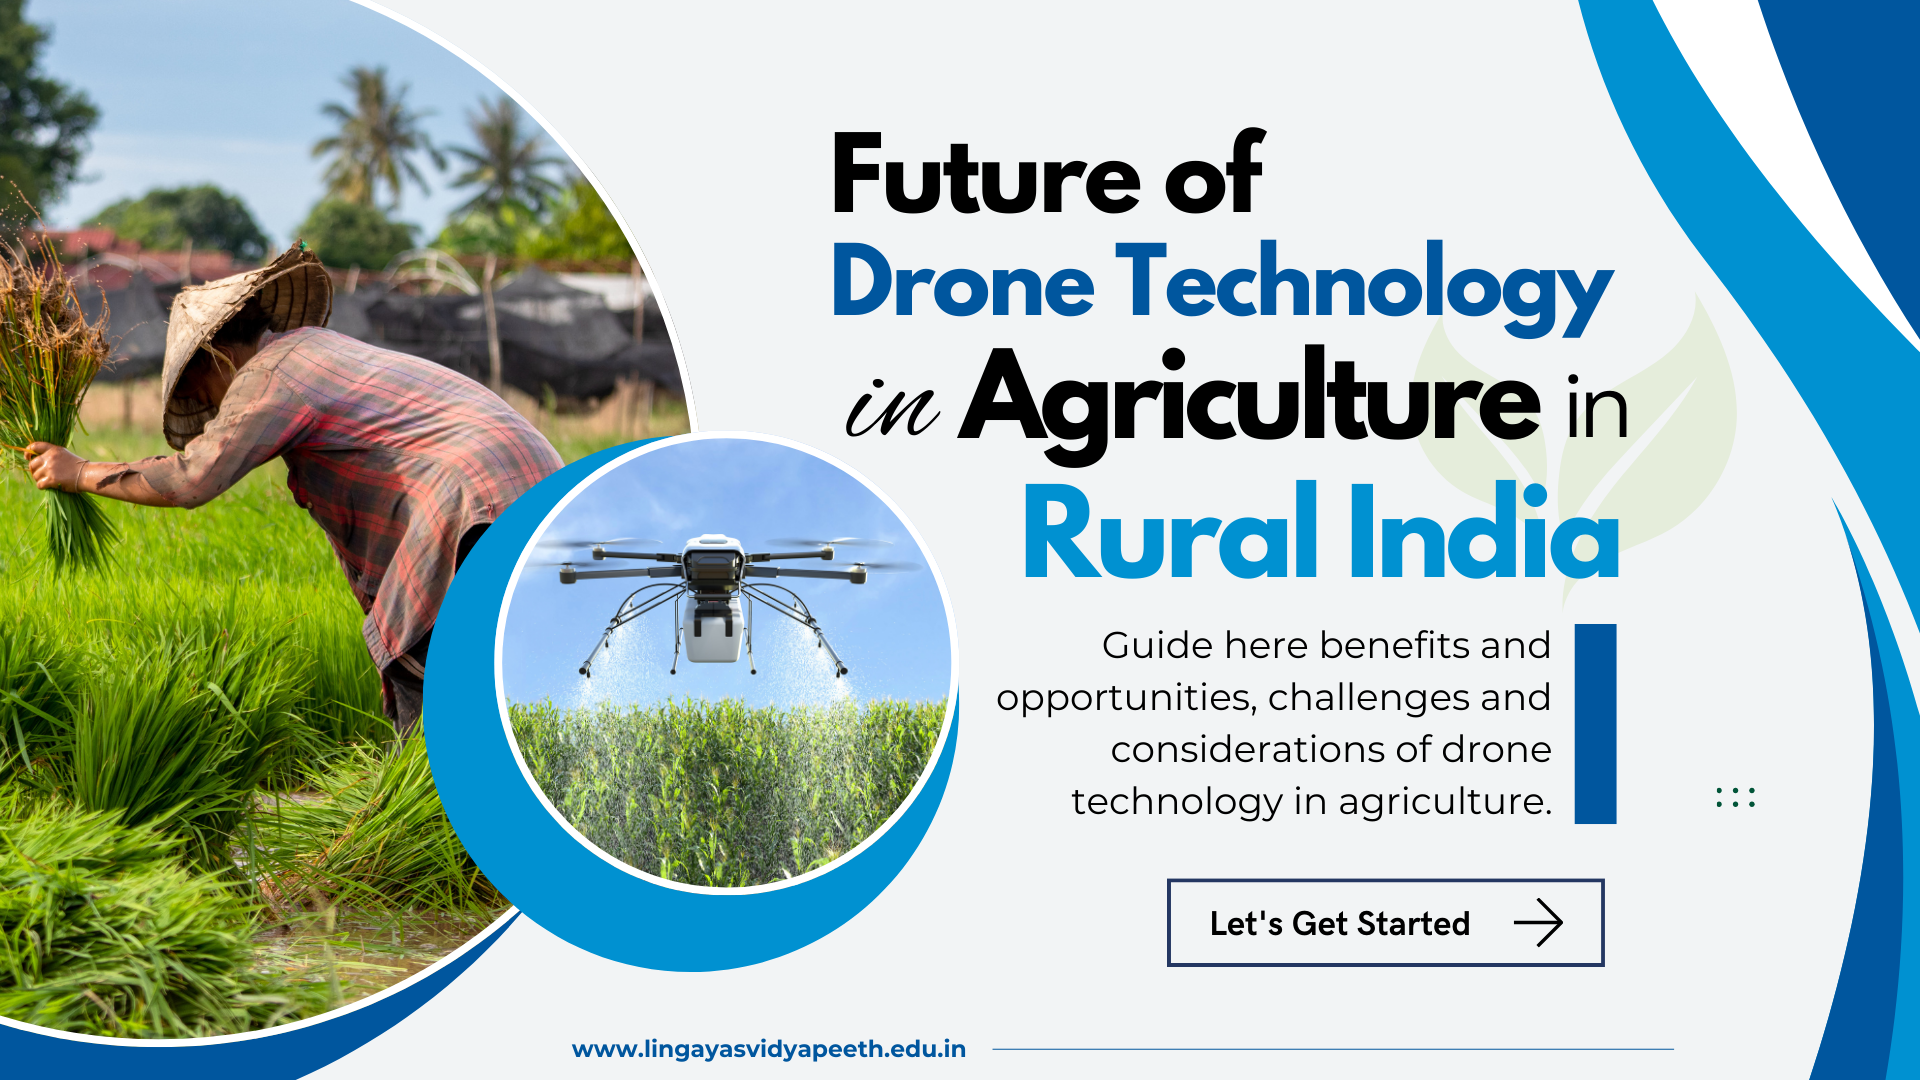 The Future of Drone Technology in Agriculture in Rural India